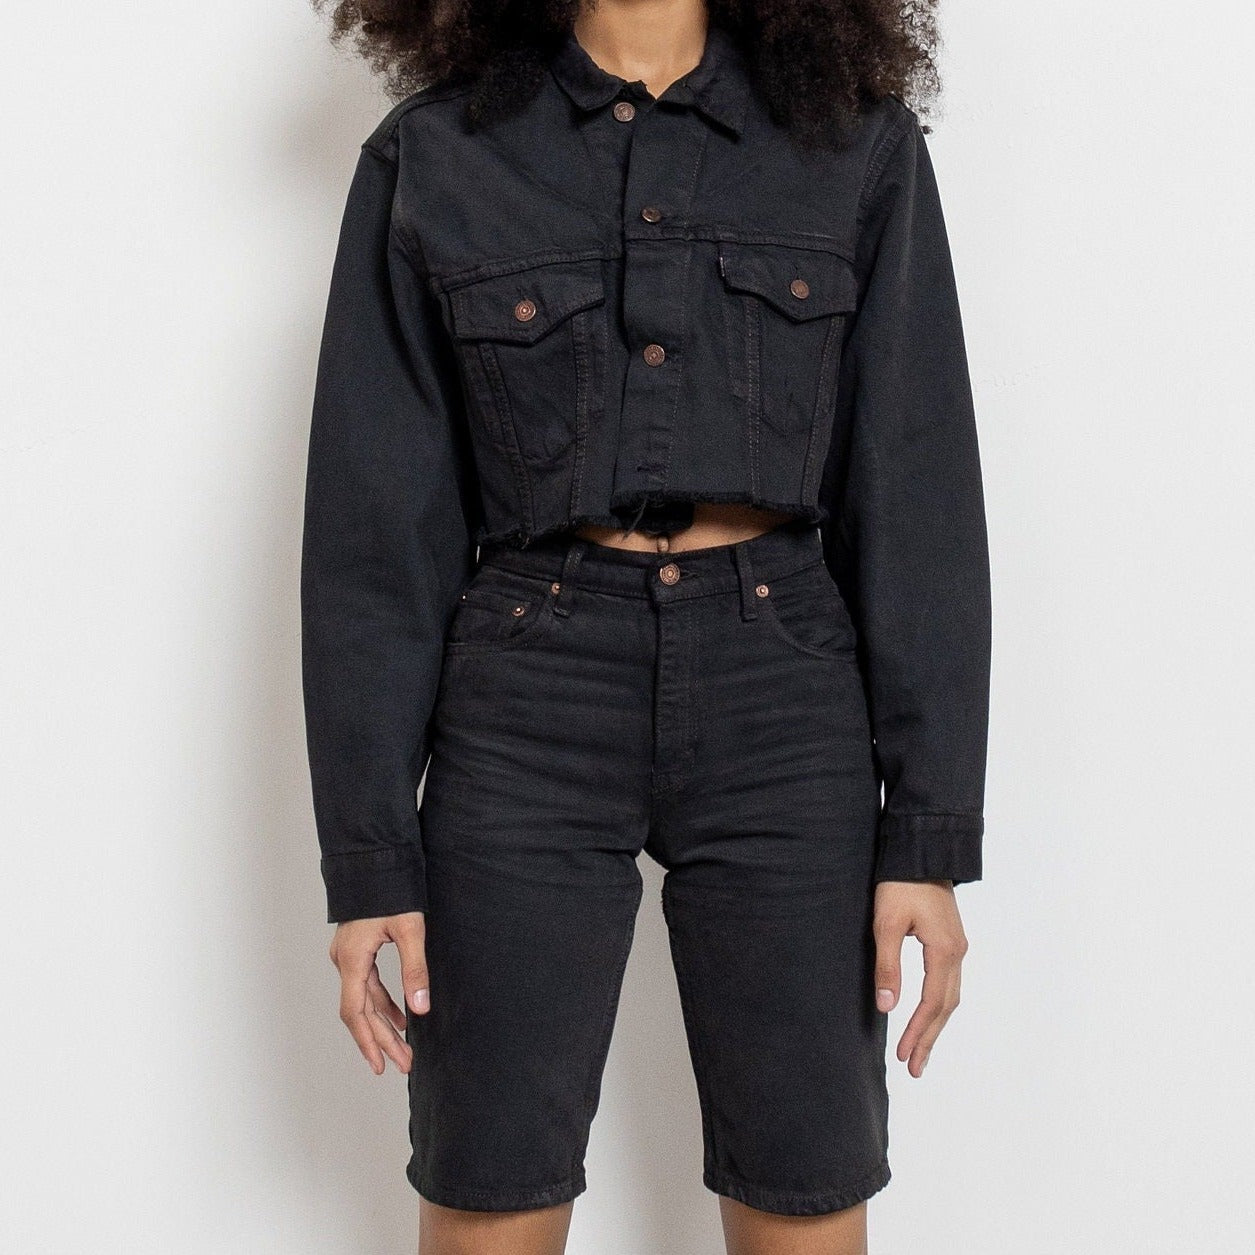 Cropped Levi's